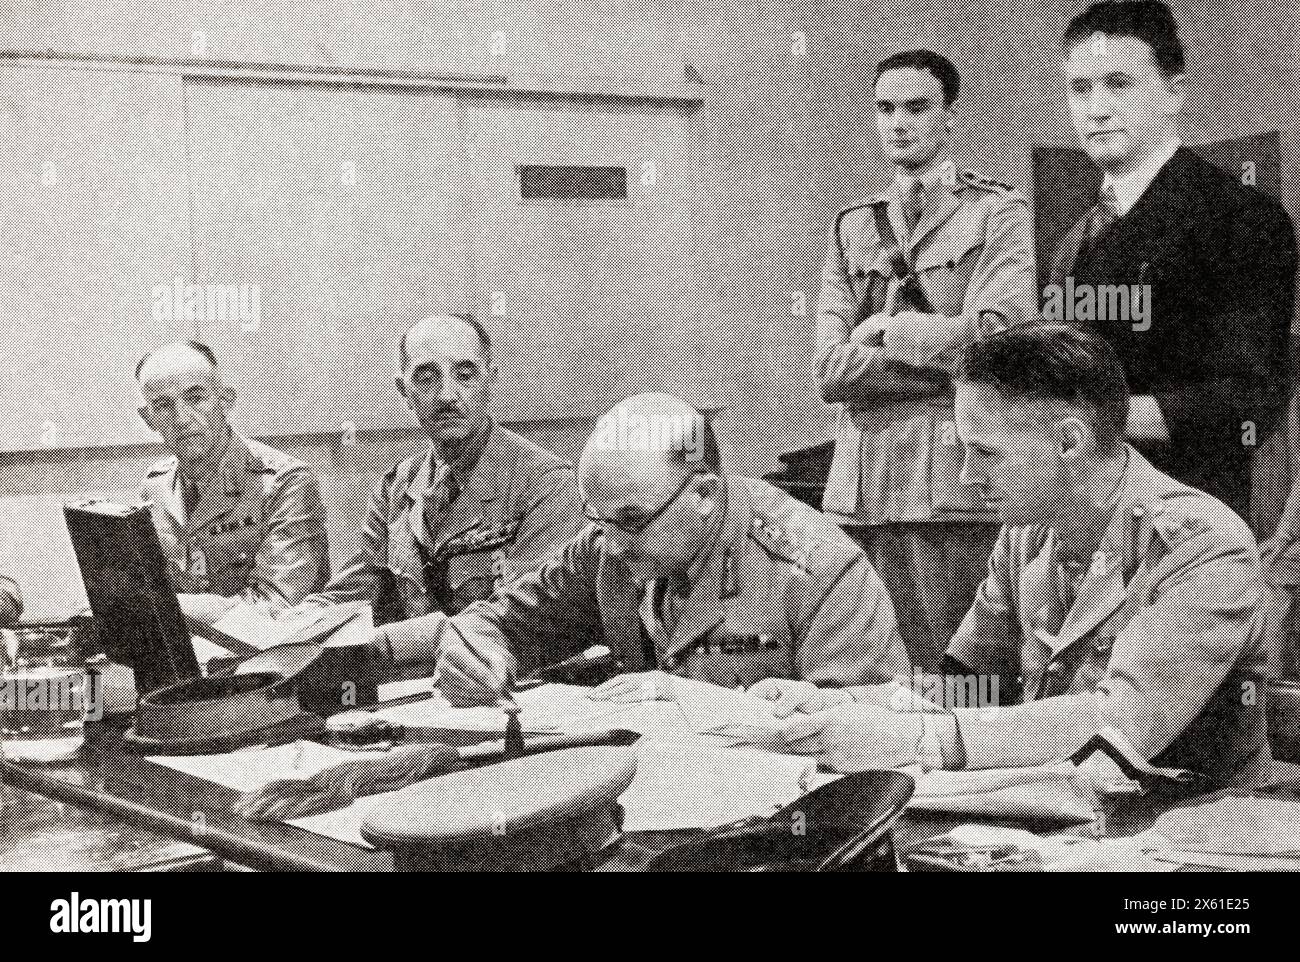 Syria under allied control.  Sir Henry Maitland Wilson with Catroux on his right, signing the ceasefire in Syria on behalf of Great Britain, 12 July, 1941.  Field Marshal Henry Maitland Wilson, 1st Baron Wilson, 1881 – 1964, aka Jumbo Wilson.  Senior British Army officer.  Georges Albert Julien Catroux, 1877 – 1969.  French Army general and diplomat.  From The War in Pictures, Sixth Year. Stock Photo